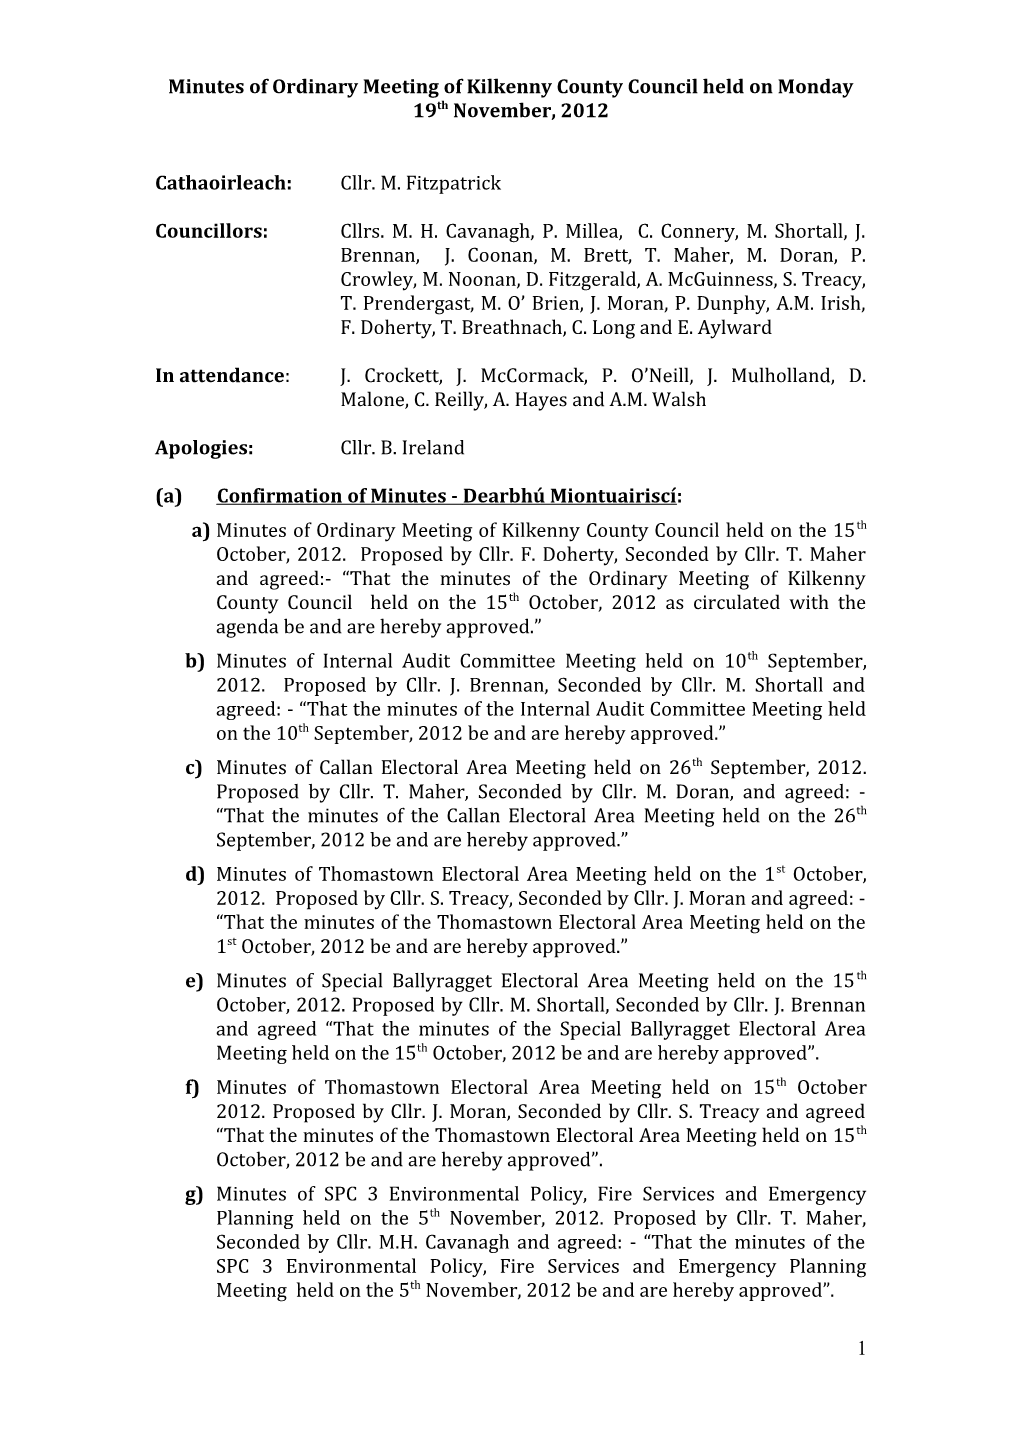 Minutes of Ordinary Meeting of Kilkenny County Council Held on Monday 19Th November, 2012